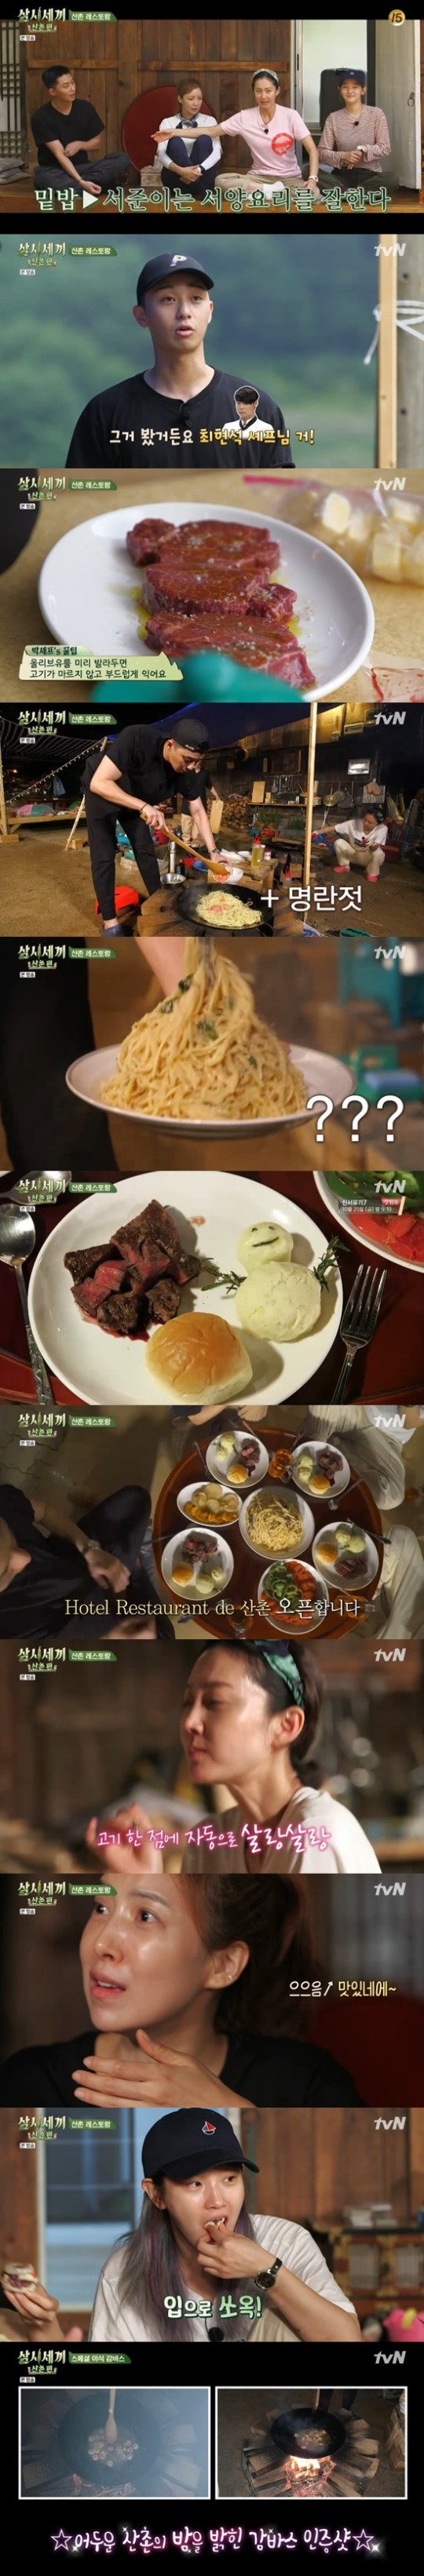 TVN Three Meals a Day Mountain Village Park Seo-joon has become the main chef of mountain village restaurant.TVN Three Meals a Day Mountain Village (director Na Young-seok, Yang Seul-gi) aired on the afternoon of the 11th, the opening of the mountain village restaurant by actor Park Seo-joon was drawn.Park Seo-joon has prepared cooking ingredients for Yum Jung-ah, Yunsea and Park So-dam.Park Seo-joon released a steak sauce recipe that only makes wine juice, saying, I saw Choi Hyun-seoks chef.Park Seo-joon then laid the ground on steak meat and applied olive oil to prepare the meat.Potato boiling for vegetable grilled, mash potato to accompany Park Seo-joon lead has begun.Park Seo-joon made a blue Pasta with boiled Pasta cotton, and Yum Jung-ah baked a steak prepared by Park Seo-joon.The members also helped cook together.Park Seo-joon built Pasta on a vast amount of Pasta. Park Seo-joon laughed at him, saying, Is not it a kitchen soldier?The menus that I had never tasted in the mountain village were followed by the members praise, especially steak sauce made with grape juice.Before Pasta blew, all the food was quickly completed, and from the steak to the moon, Pasta and Massid Potate were completed to enjoy a satisfying mountain restaurant.Photo = DB